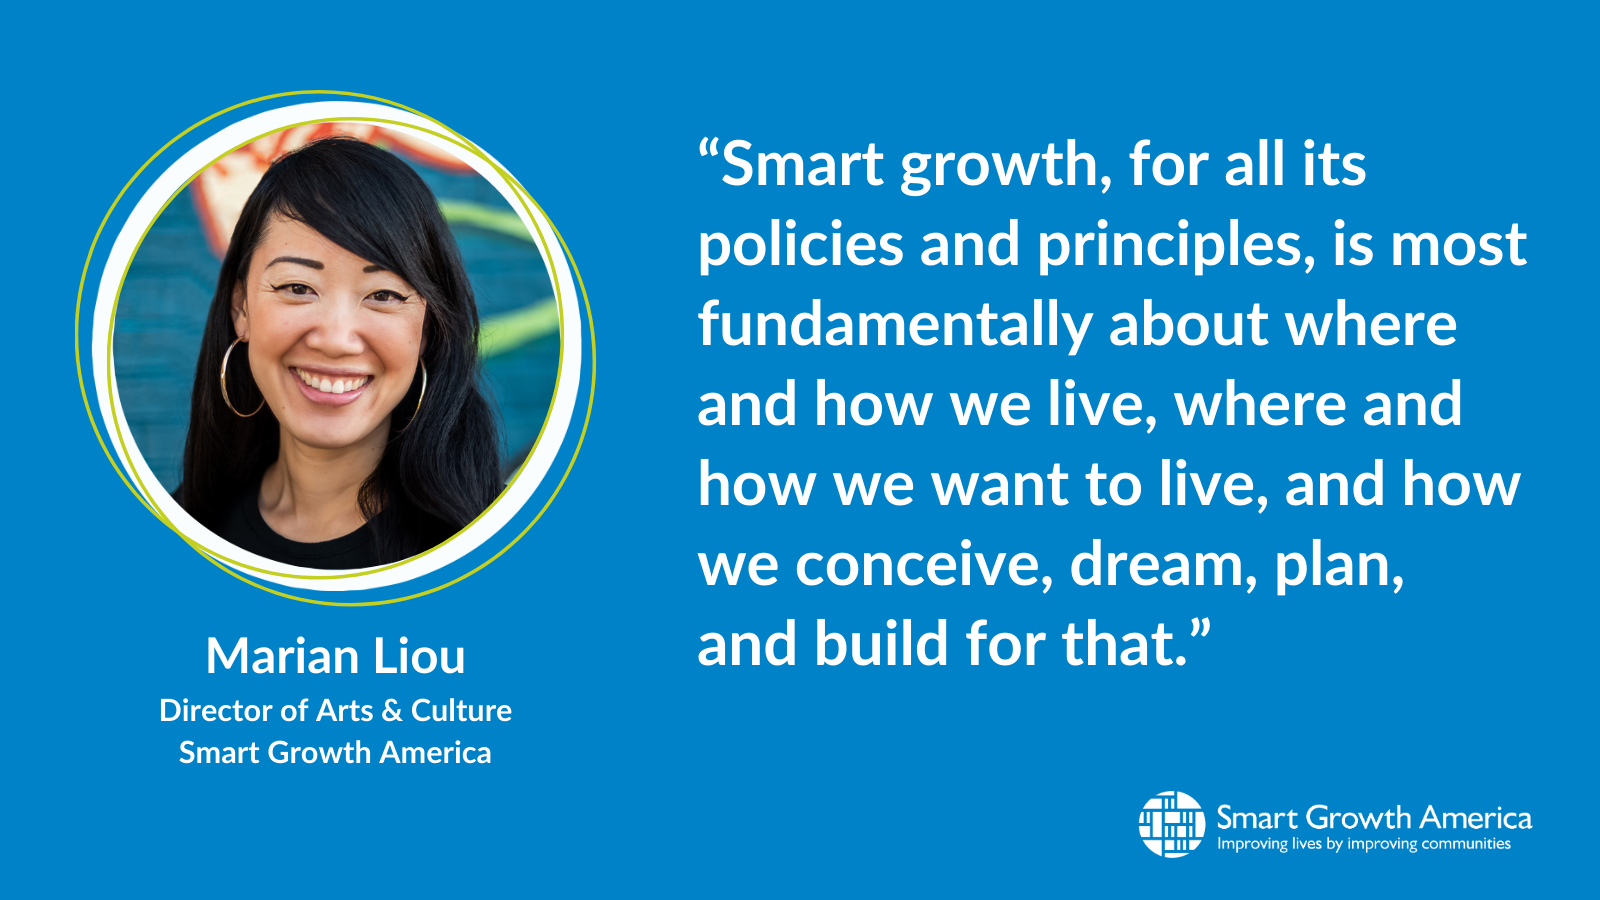 Marian Liou's headshot and title, plus a quote: Smart growth, for all its policies and principles, is most fundamentally about where and how we live, where and how we want to live, and how we conceive, dream, plan, and build for that.